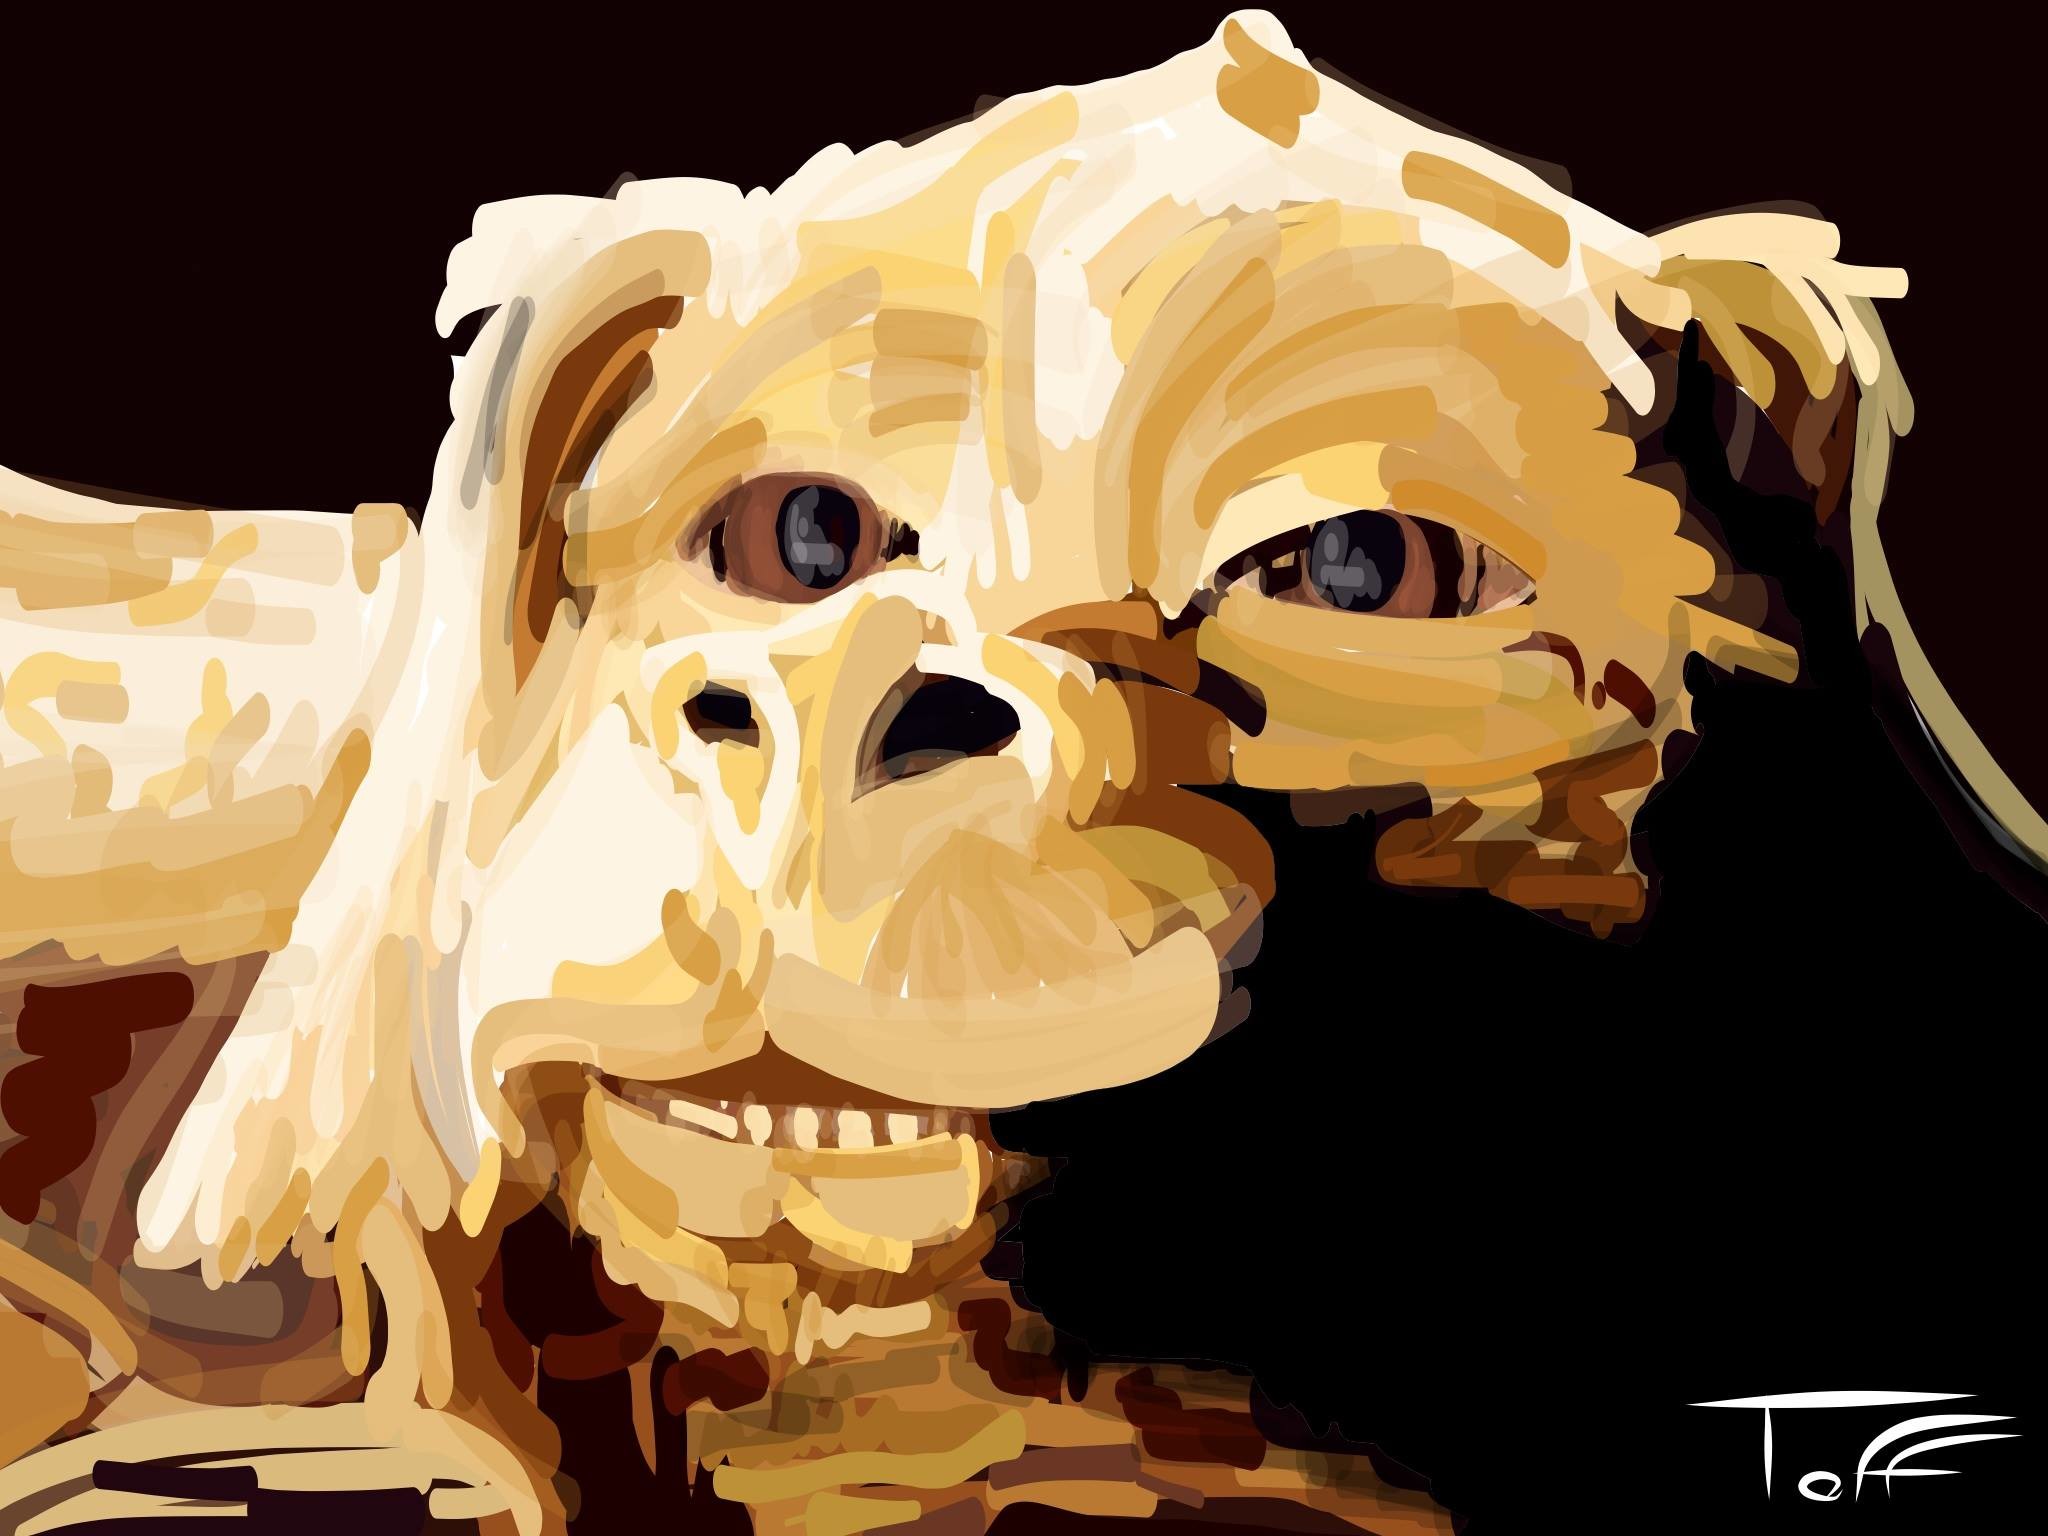 2048x1536 ... Falcor - The NeverEnding Story by ToffGraff